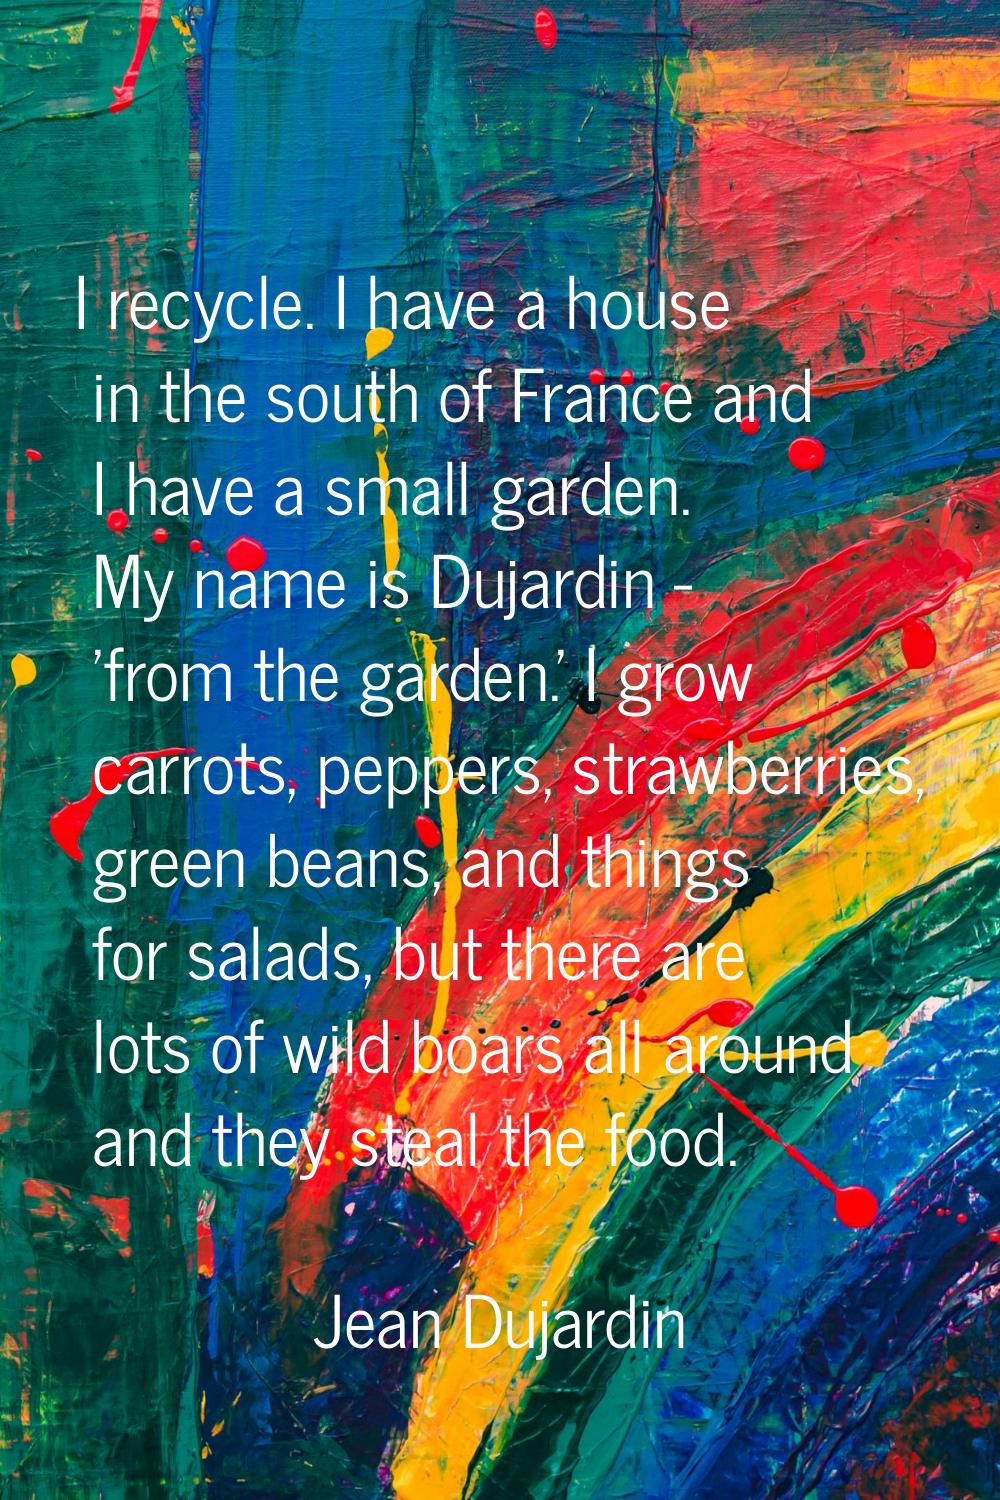 I recycle. I have a house in the south of France and I have a small garden. My name is Dujardin - '